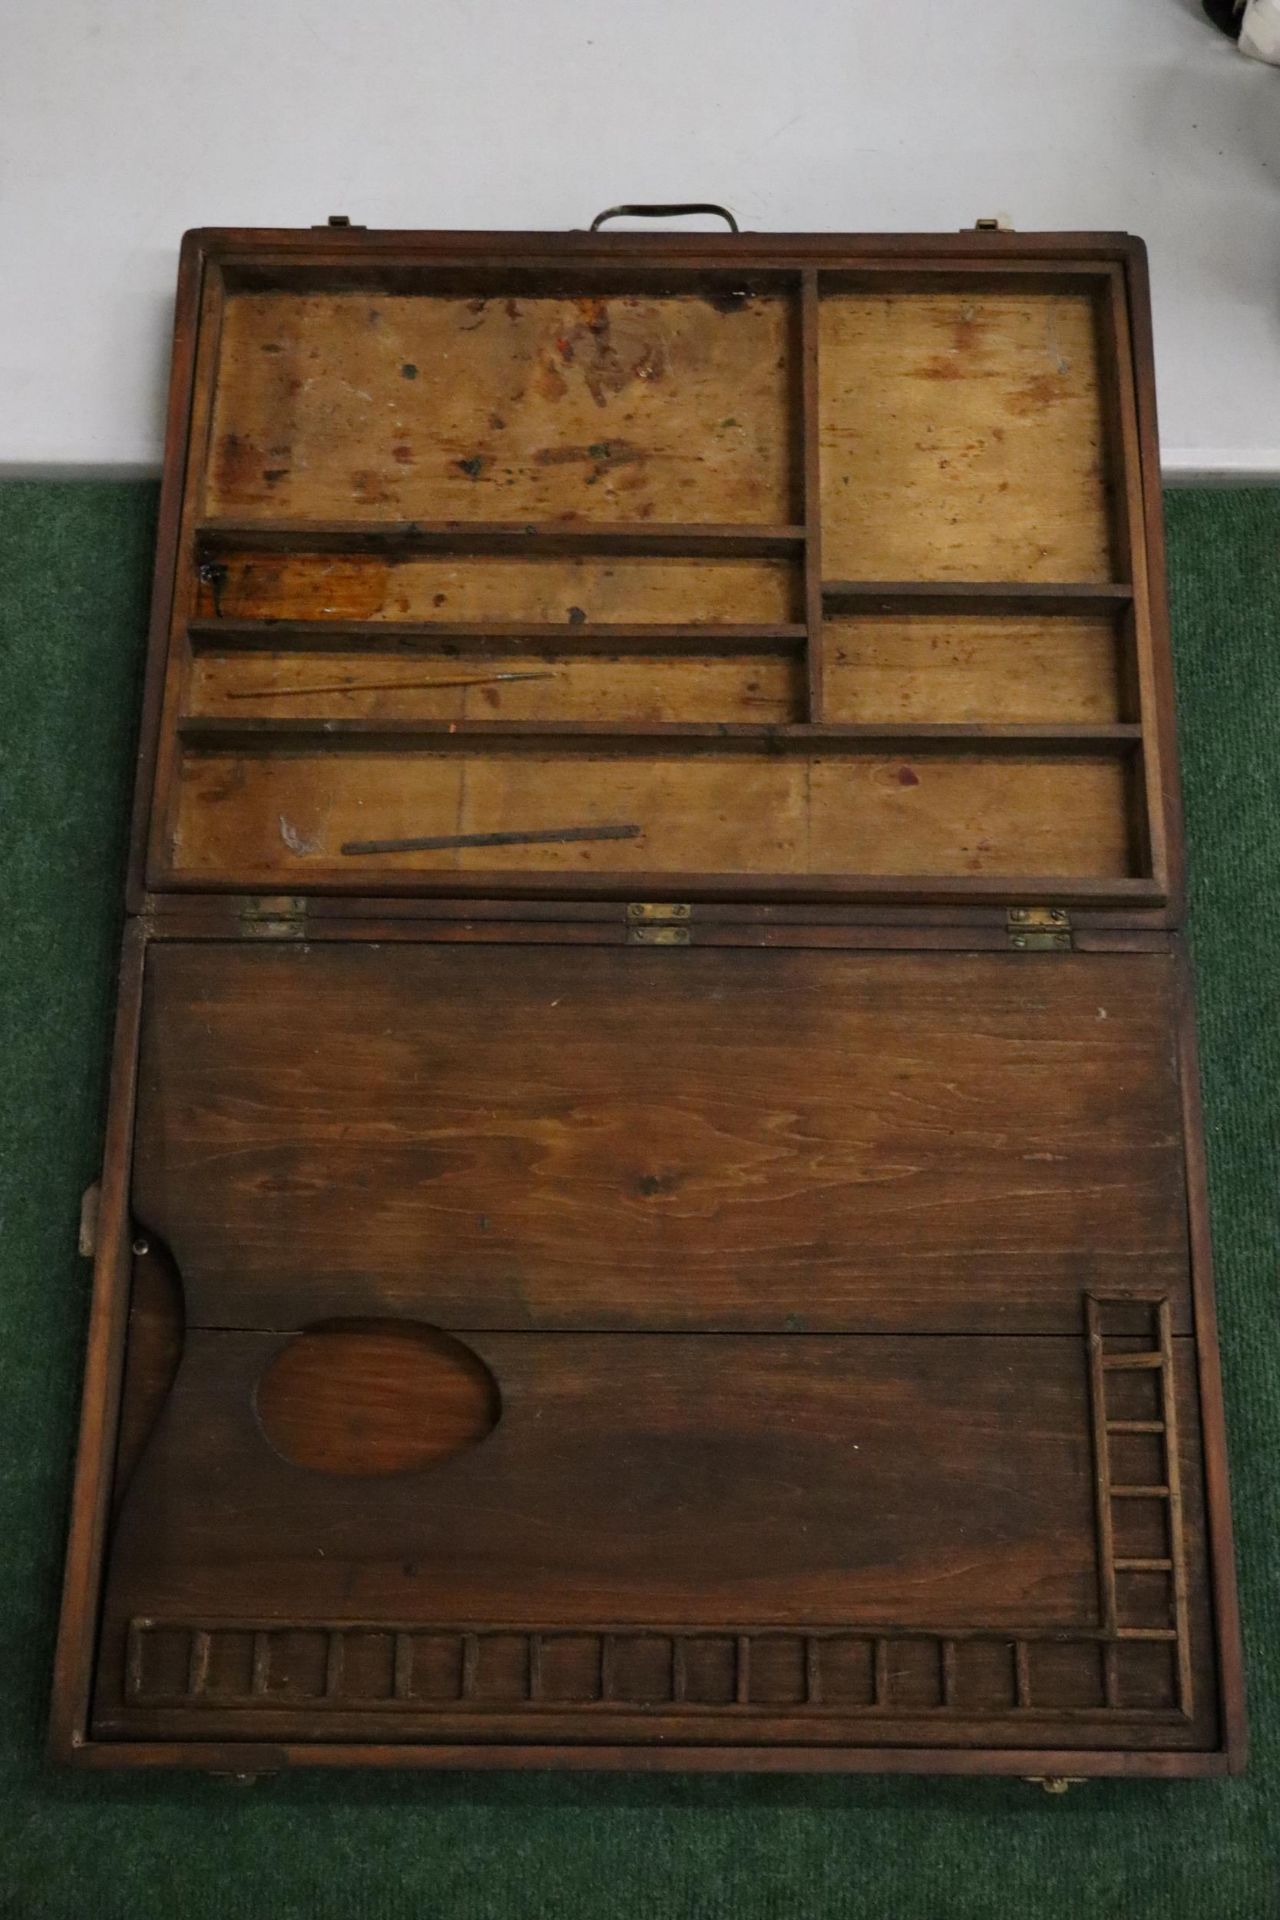 A VINTAGE ARTISTS PALETTE AND PAINT TRAY IN A WOODEN CASE - Image 3 of 9